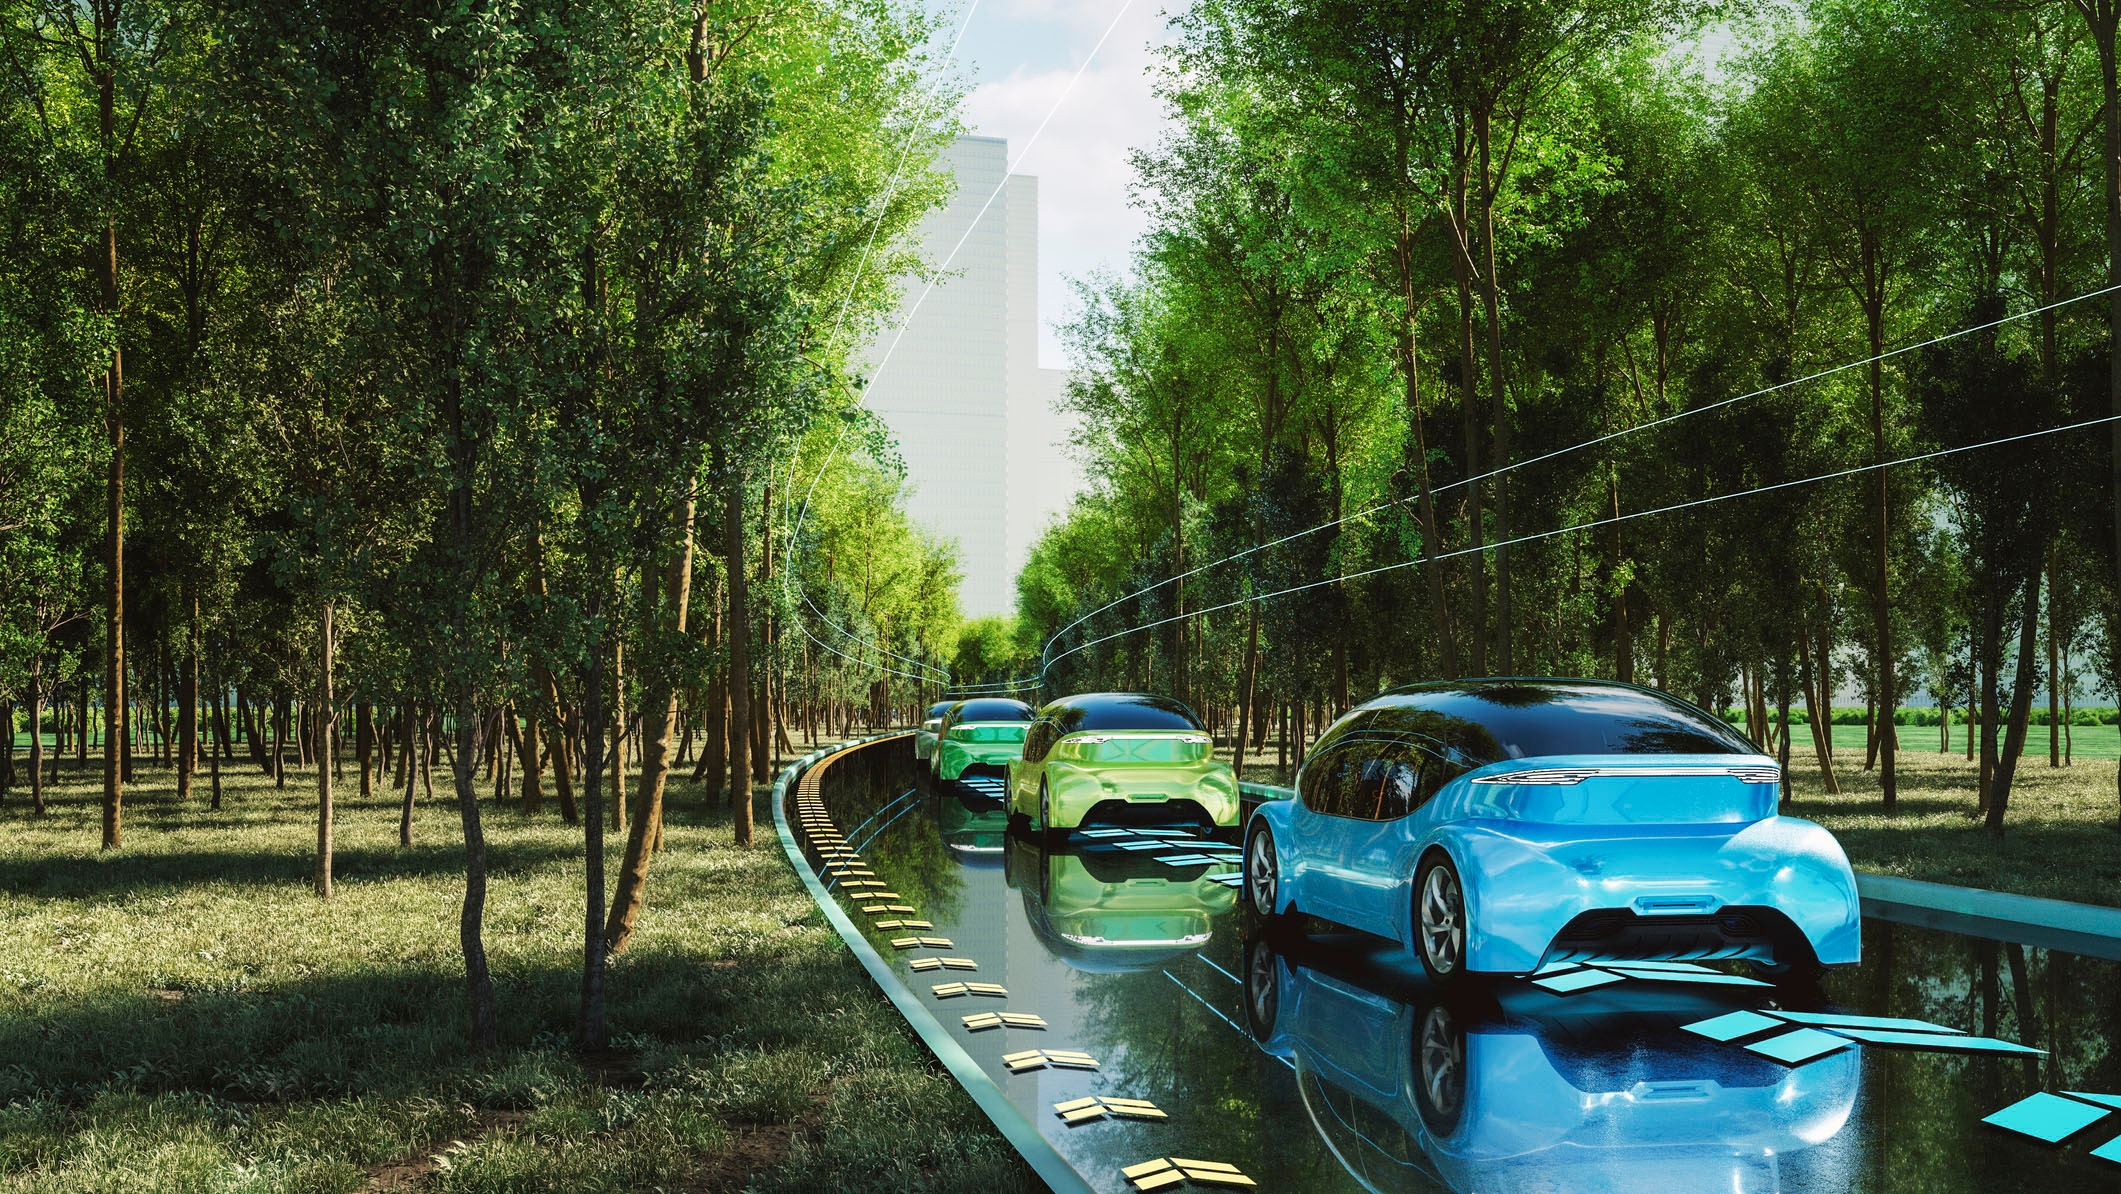 Rendered image of future transport - self driving, electric vehicles.